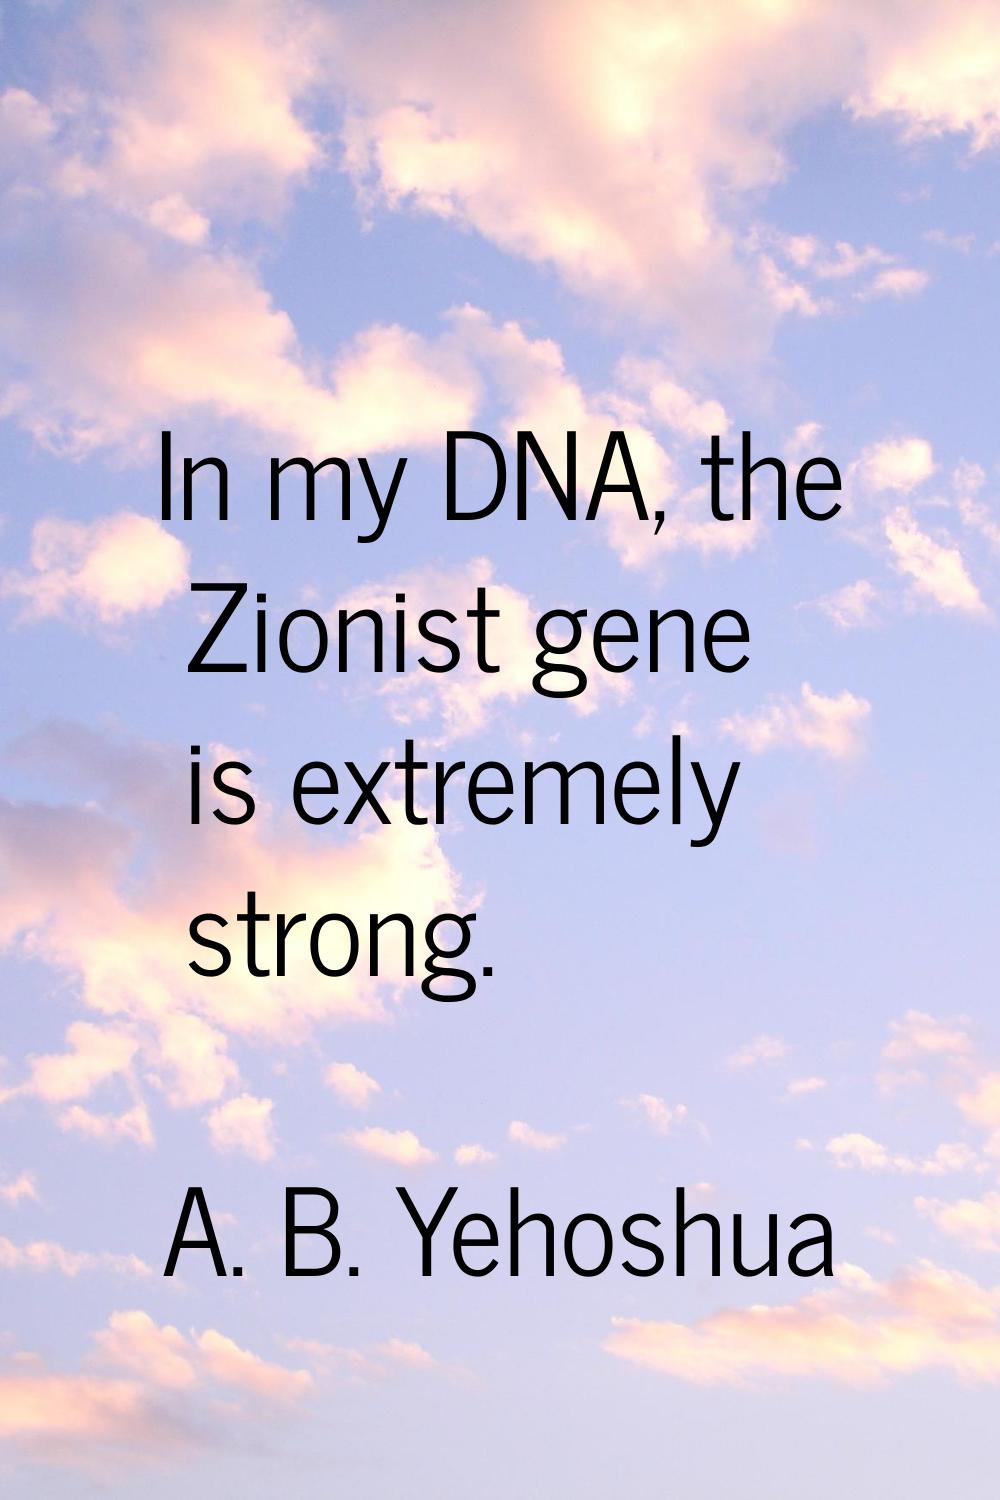 In my DNA, the Zionist gene is extremely strong.